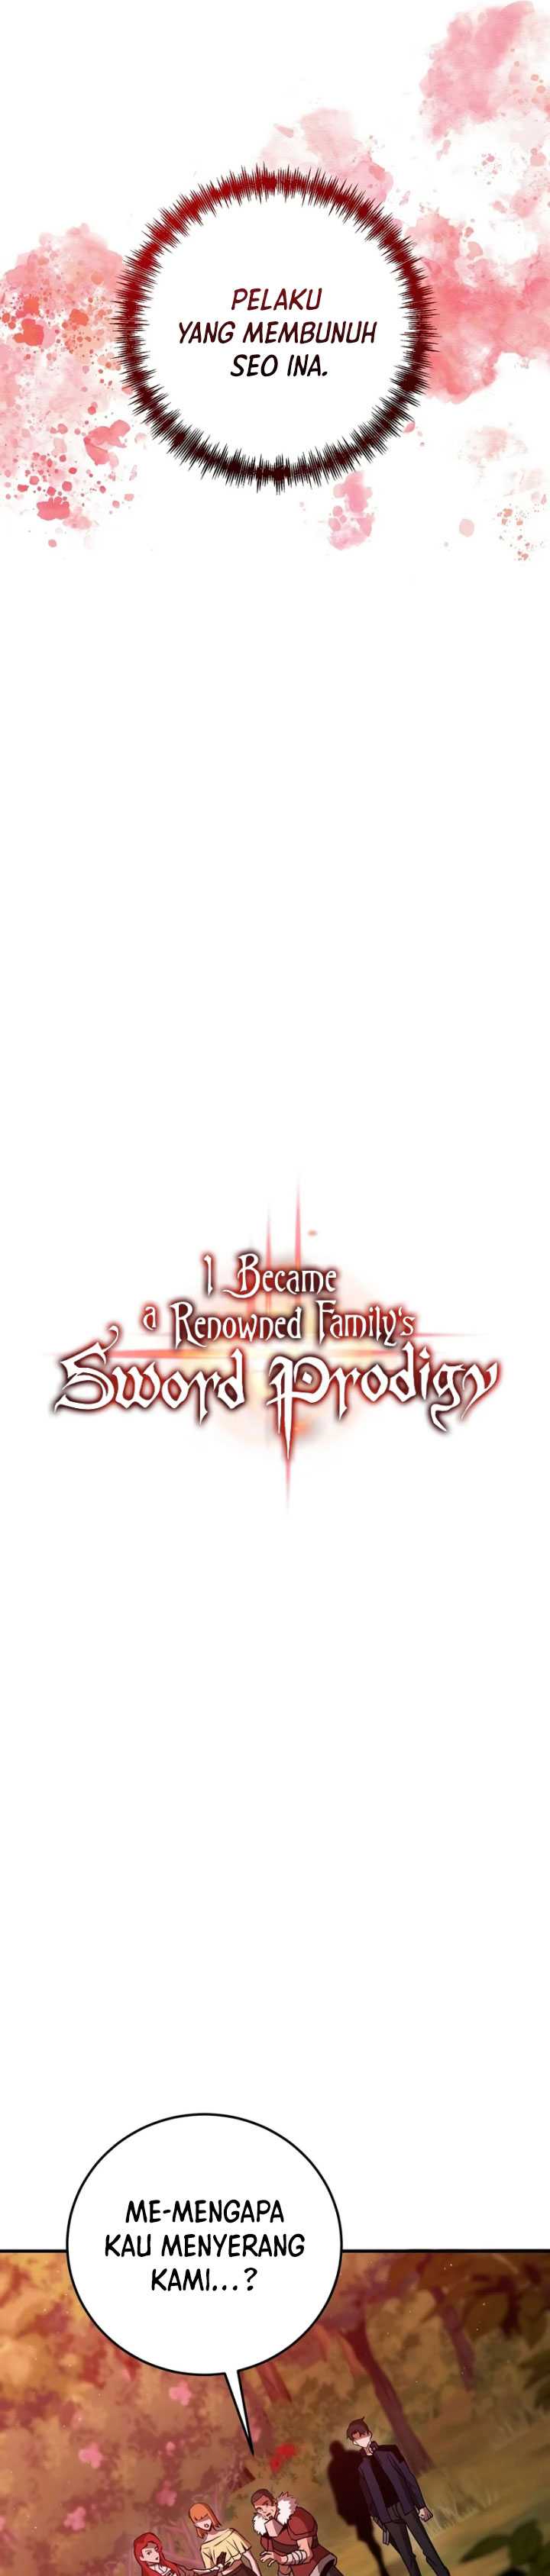 I Became a Renowned Family’s Sword Prodigy Chapter 22